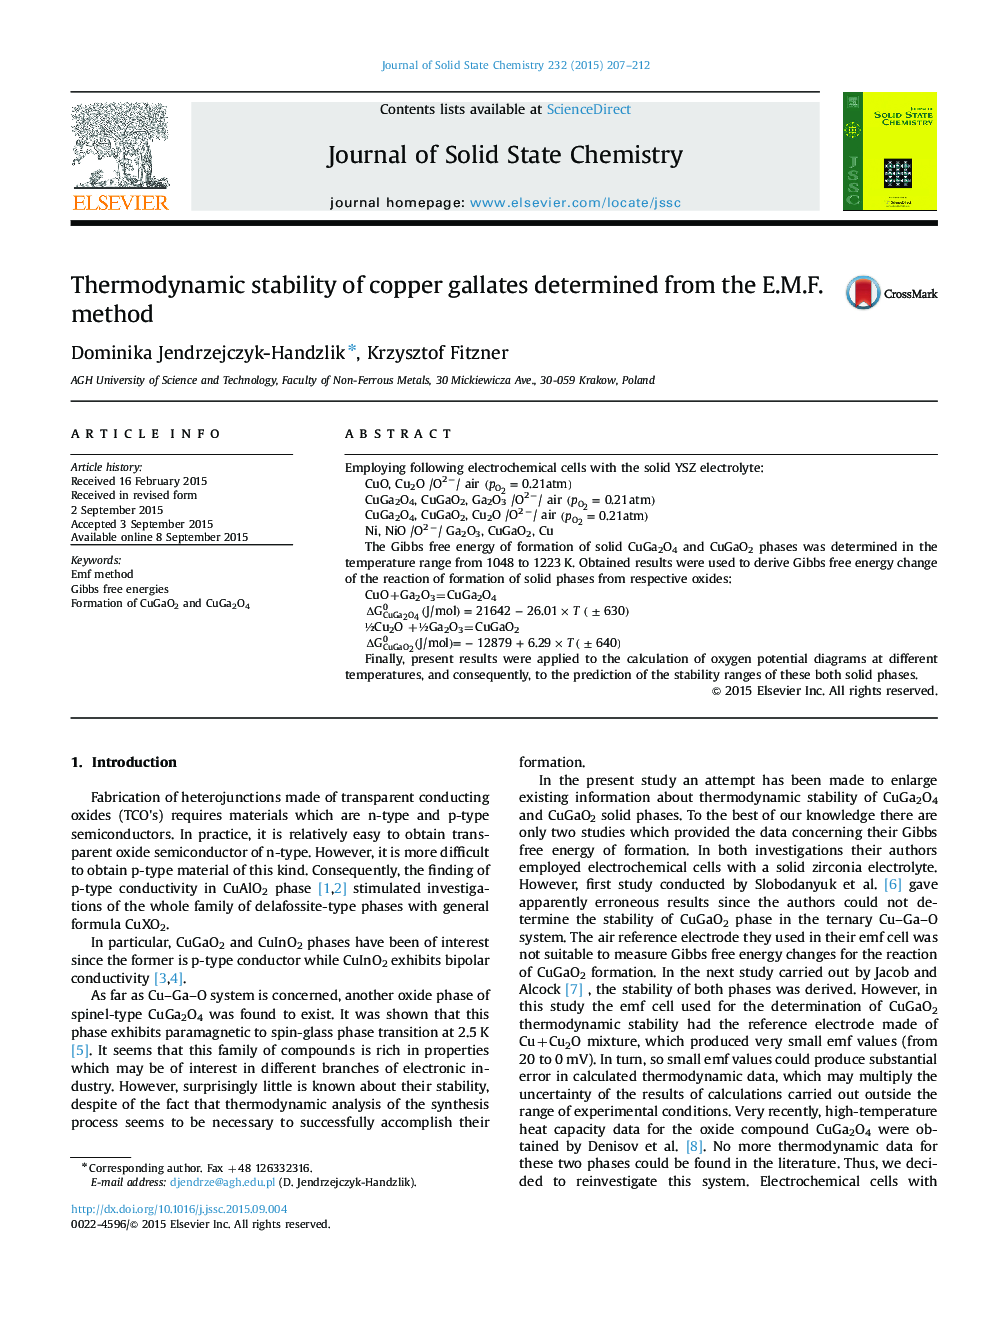 Thermodynamic stability of copper gallates determined from the E.M.F. method